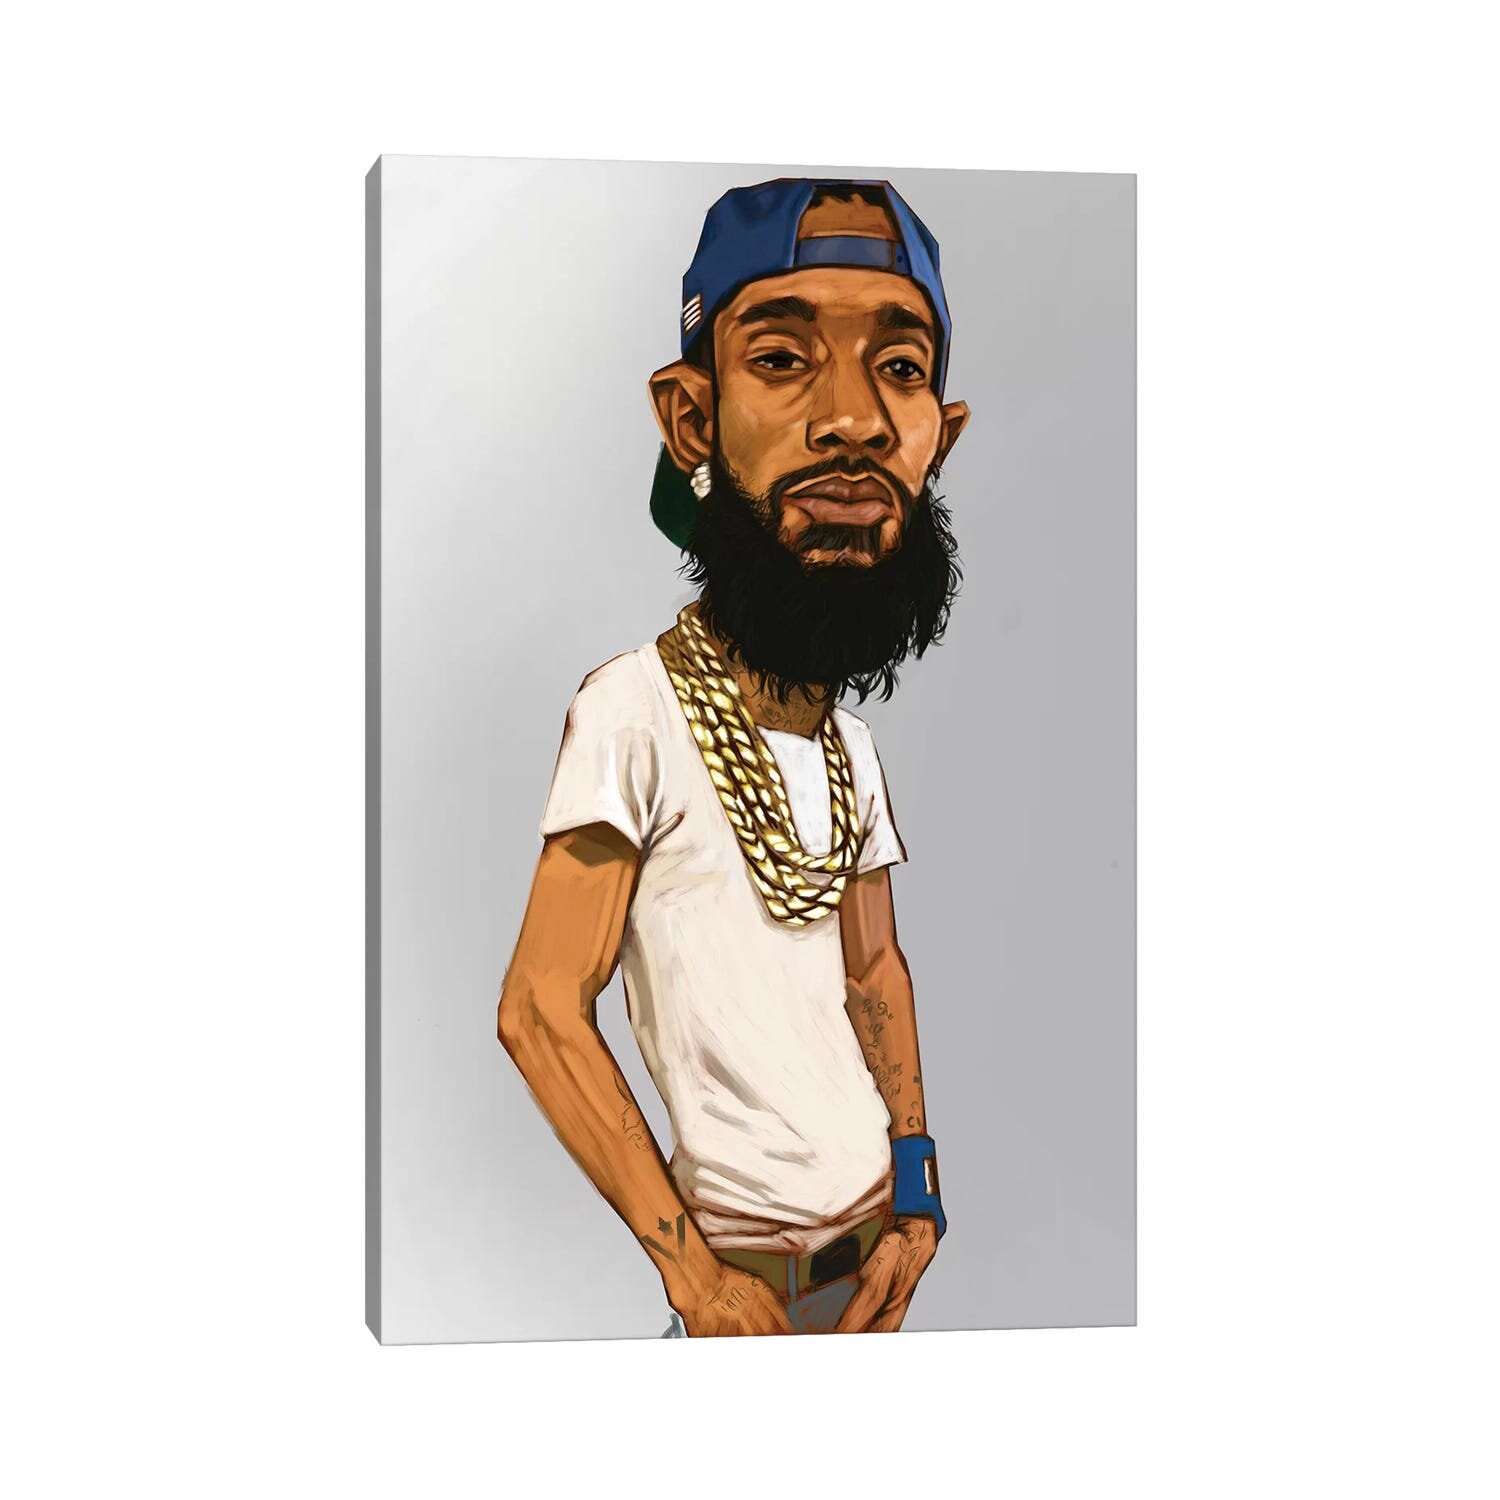 Nipsey Hussle by Evan Williams - Wrapped Canvas Painting Print East Urban Home Size: 18 H x 12 W x 1.5 D